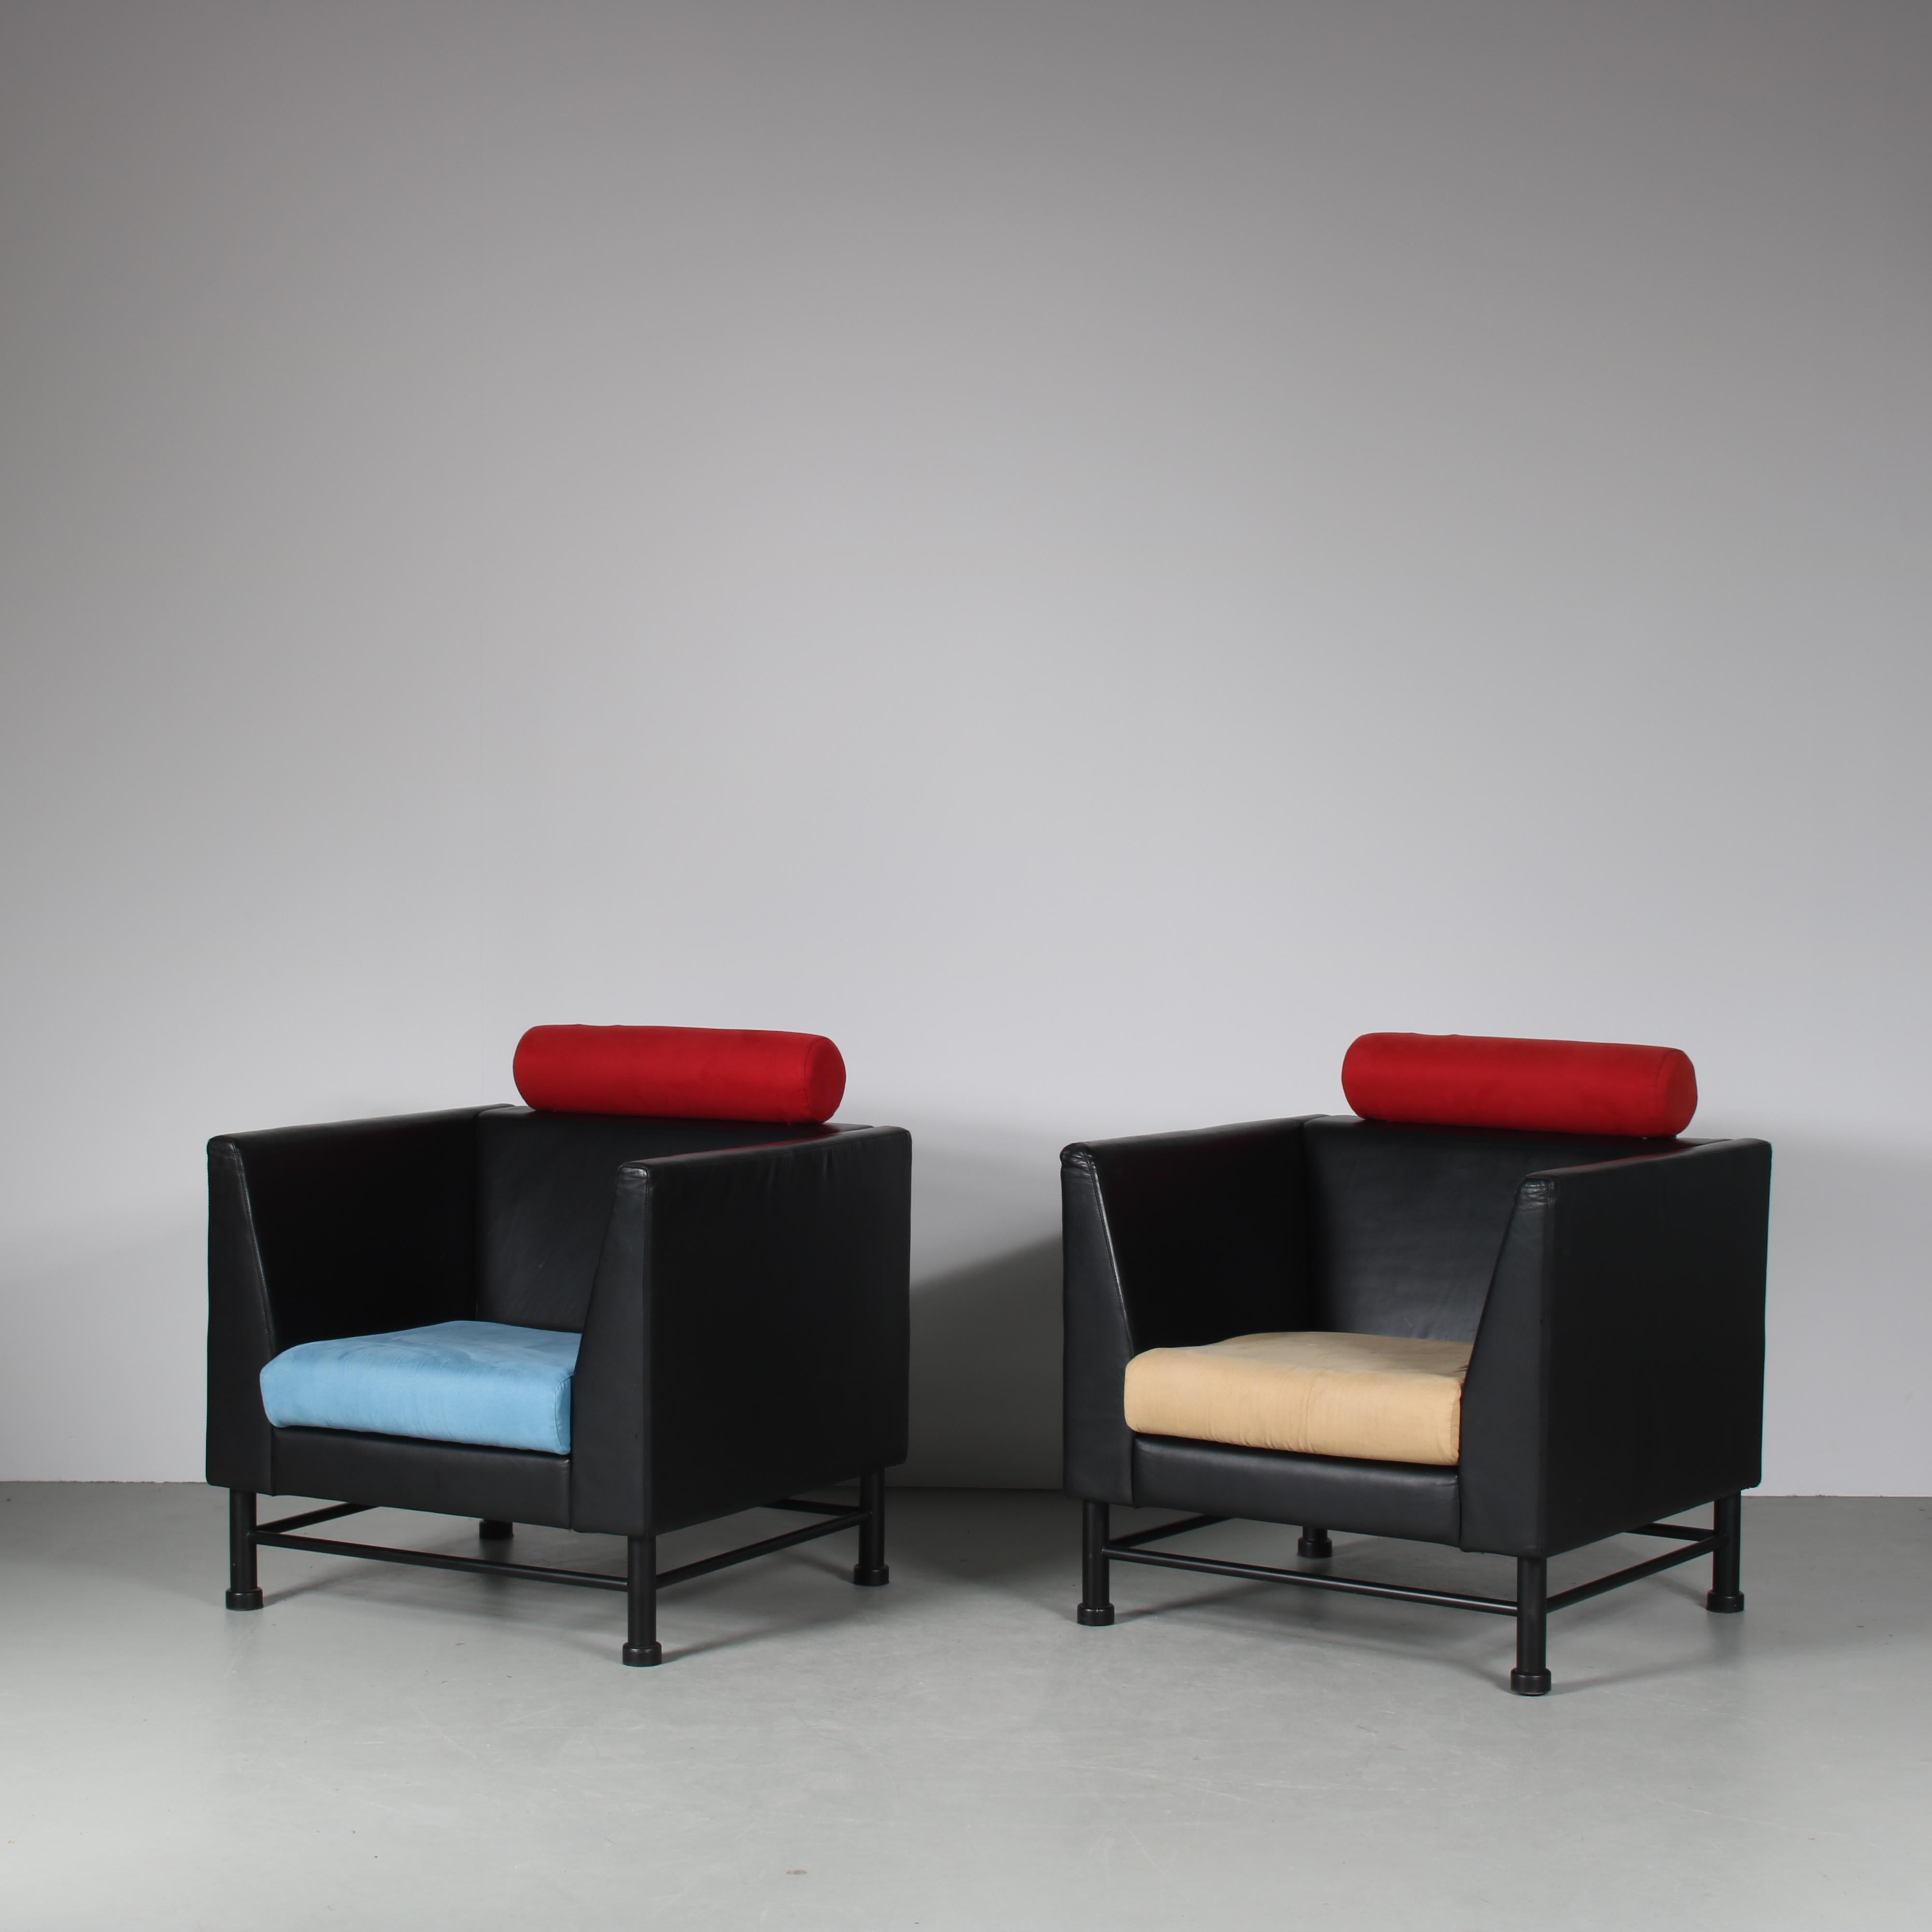 A wonderful pair of “Easy Side” chairs, designed by Ettore Sottsass and manufactured by Knoll International in the USA around 1980.

Made of high quality black leather with red suède neckrests. The seating cushions are also upholstered in suède,